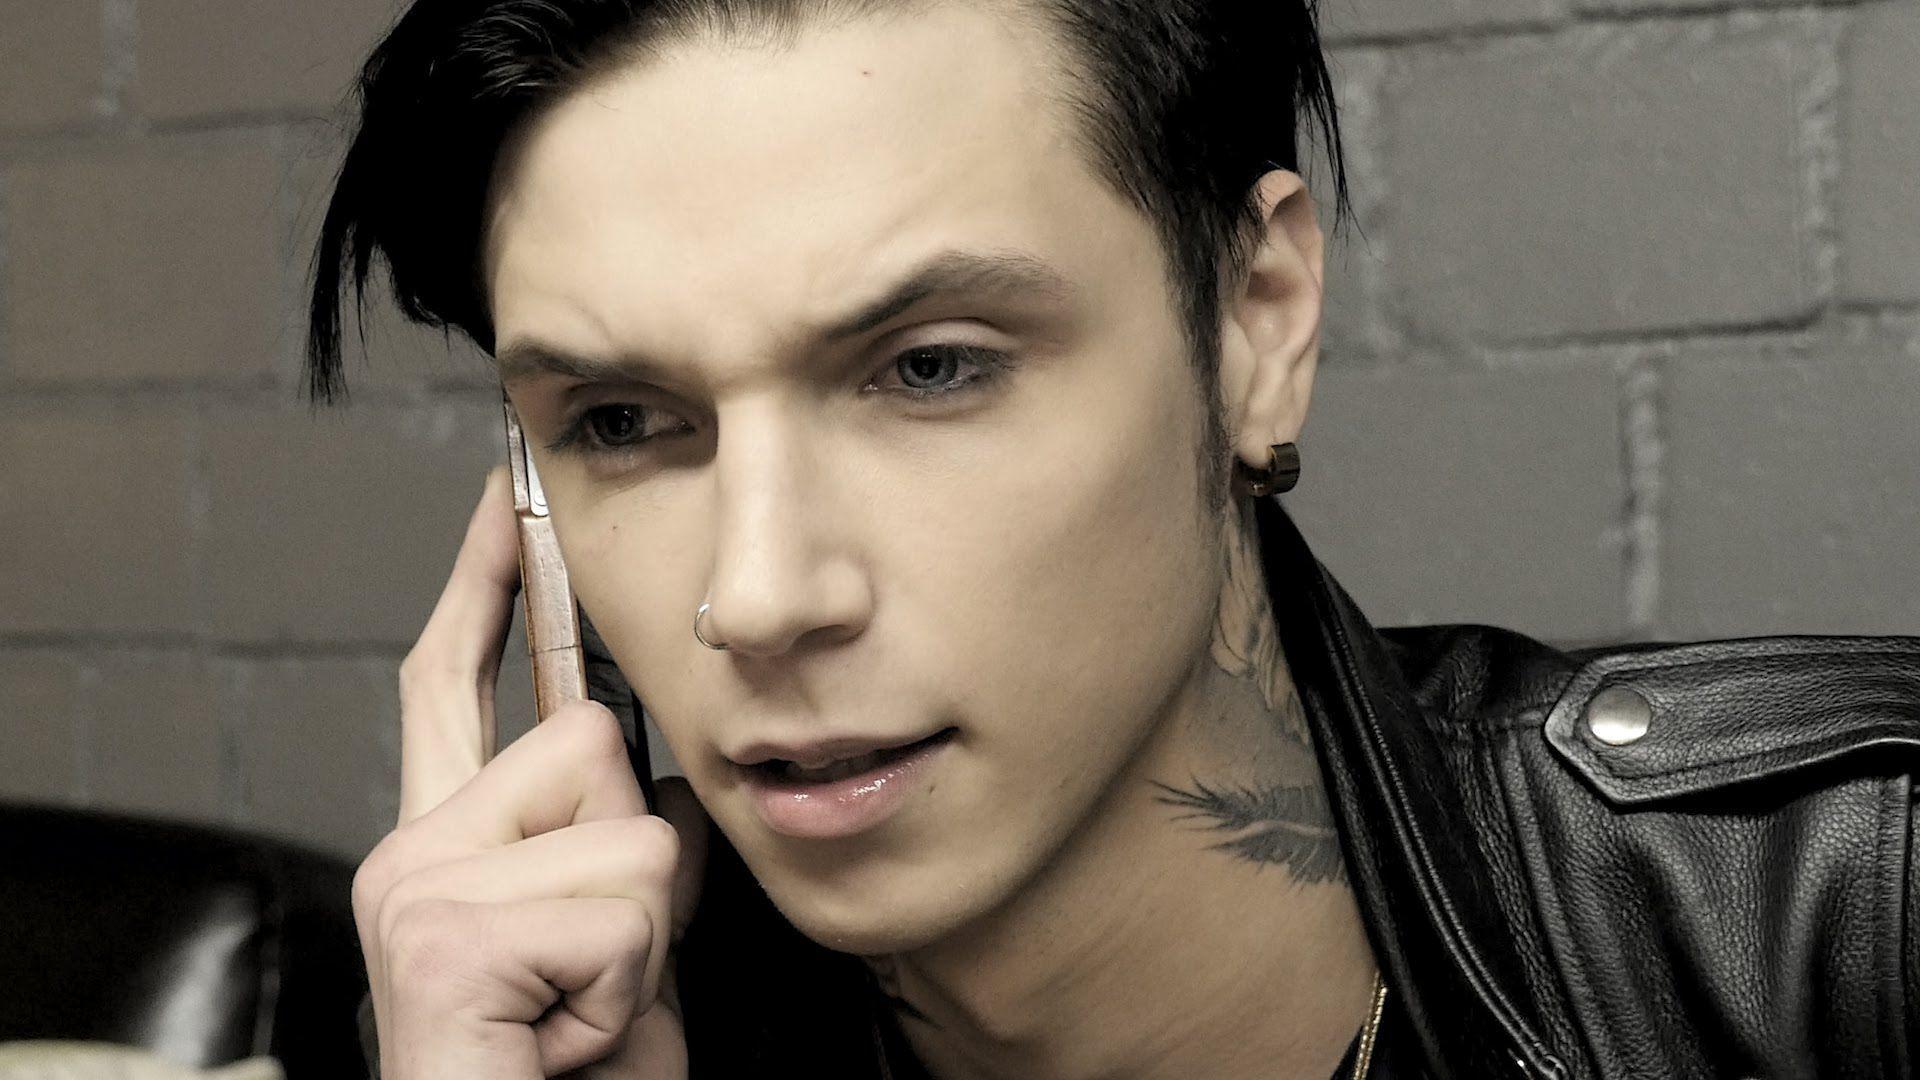 Andy biersack onision